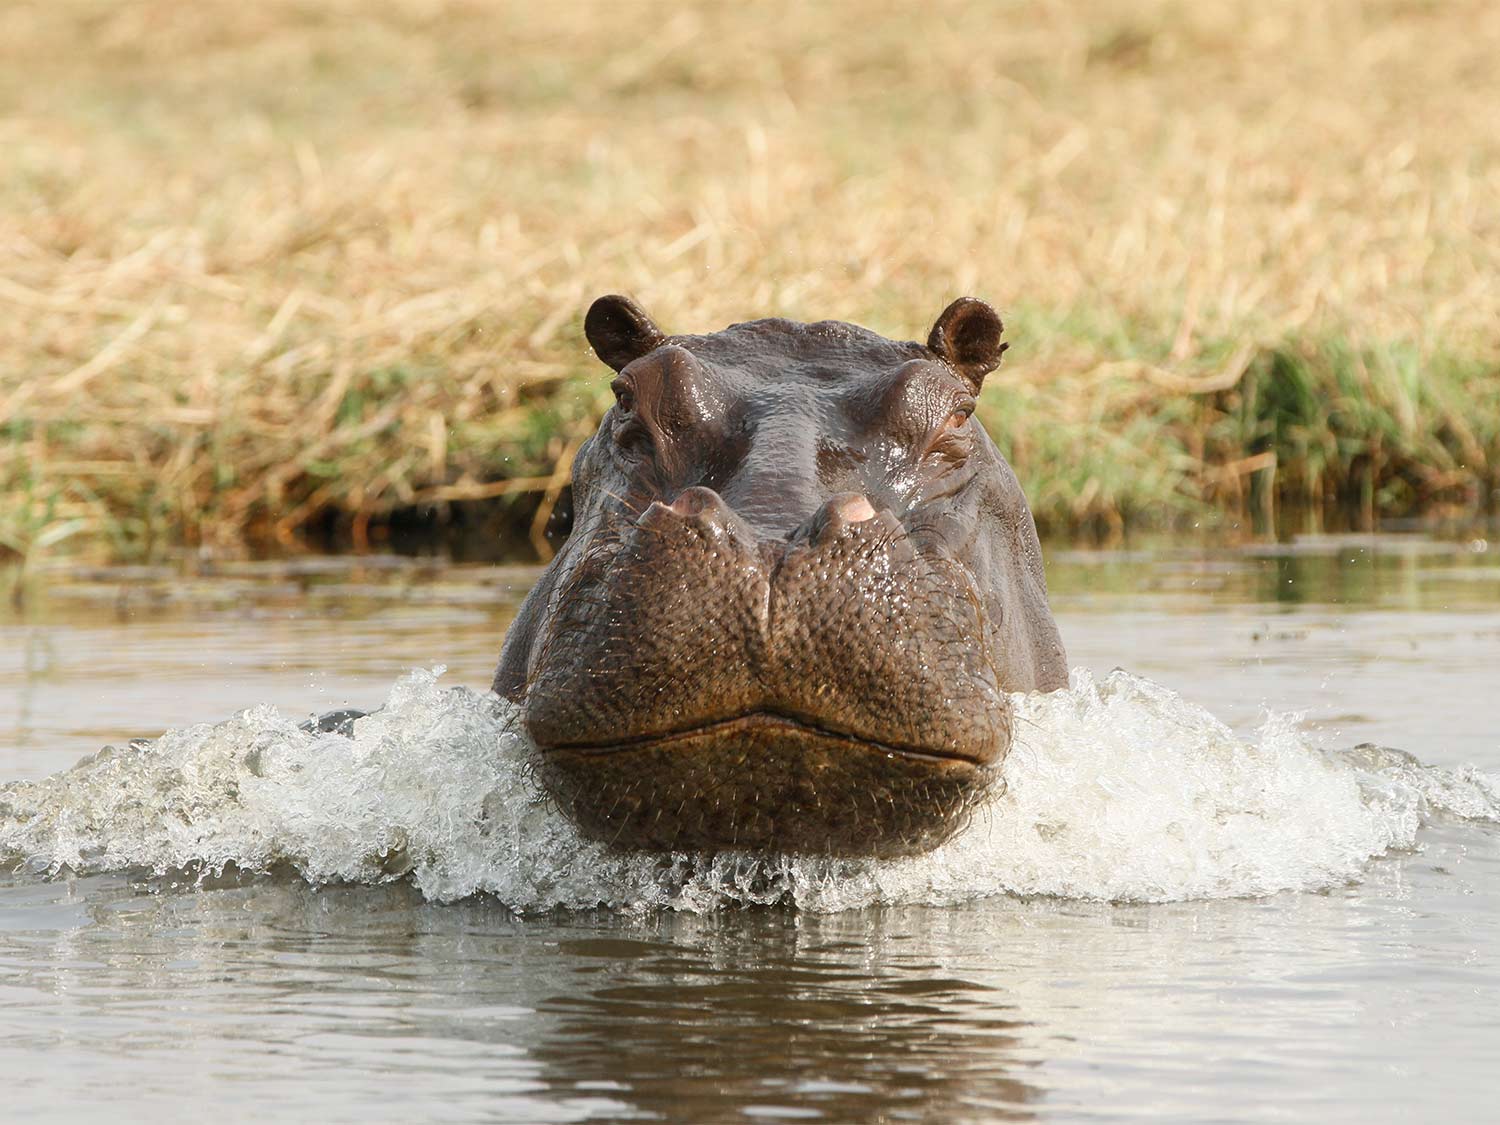 An angry hippo charging at the photographer through the water.